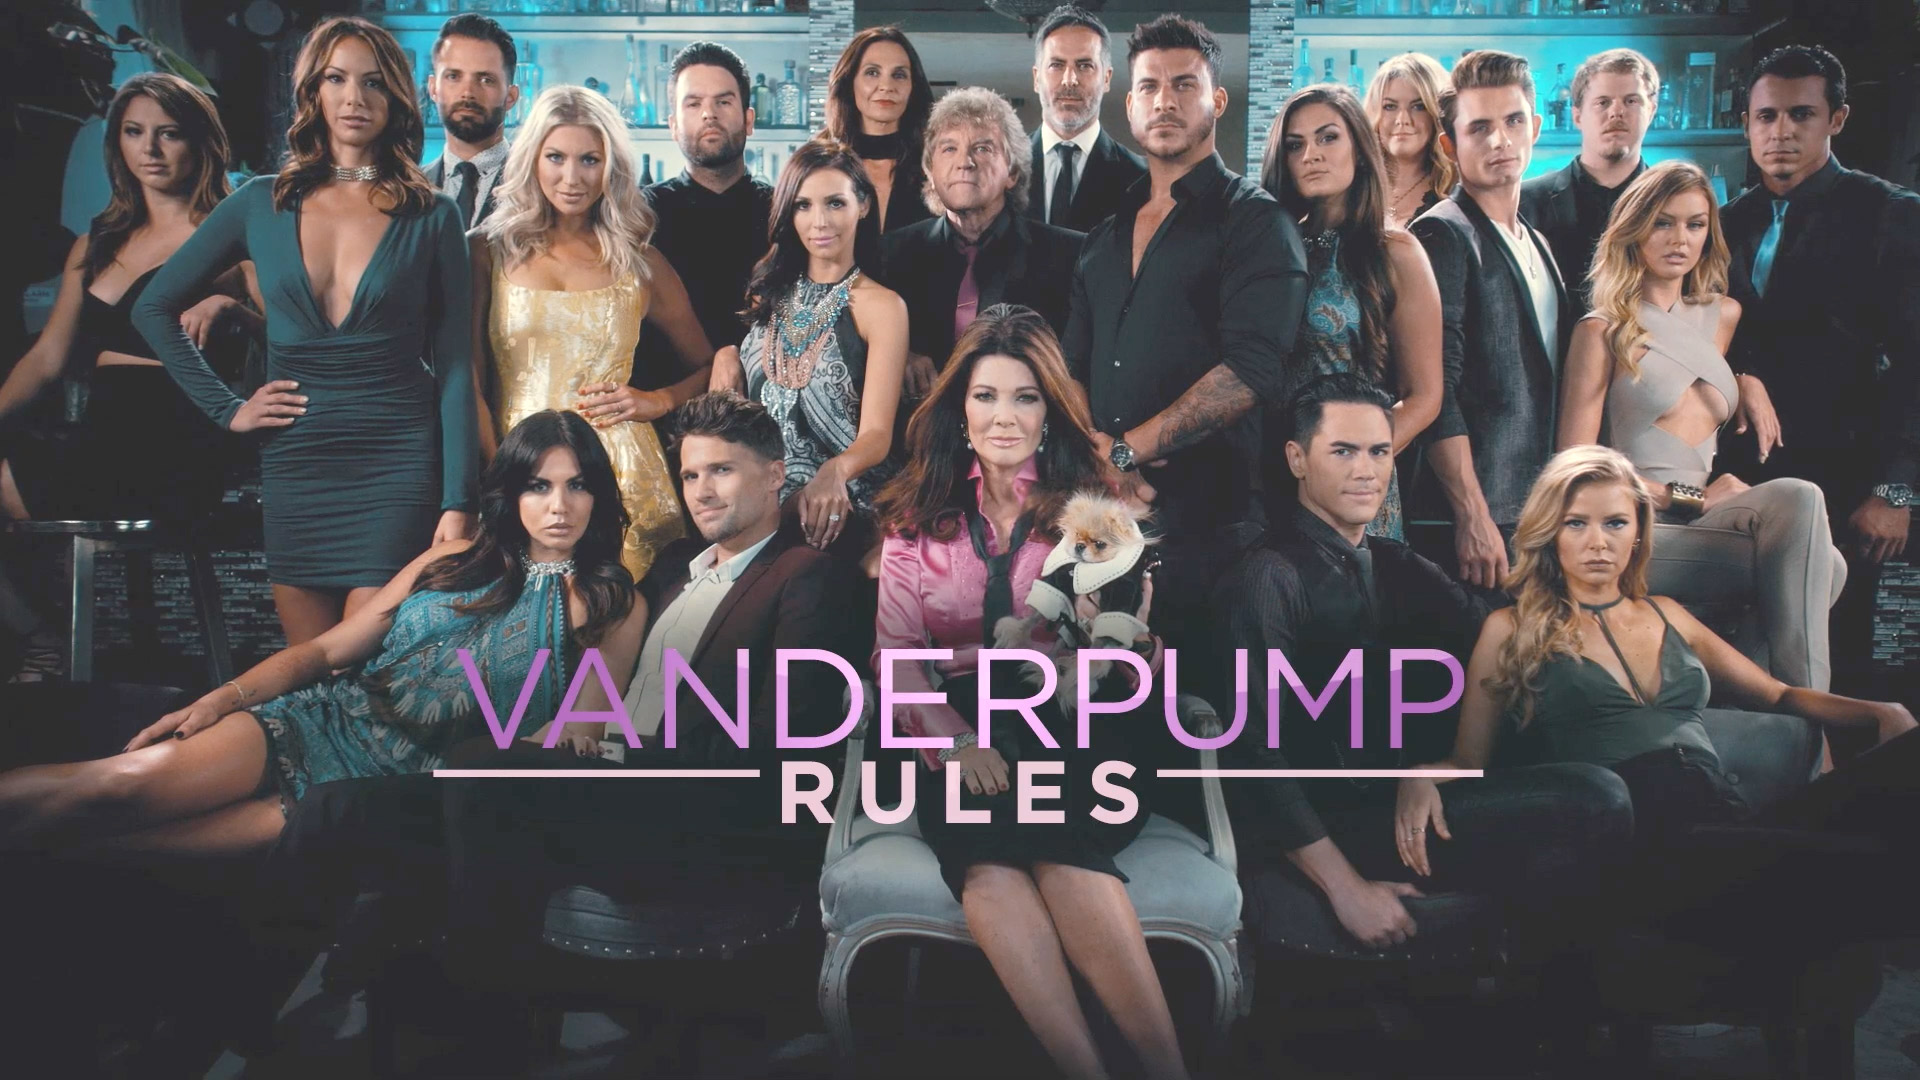 Get Your First Look At the Vanderpump Rules Season 5 Show Open - When Is The New Season Of Vanderpump Rules